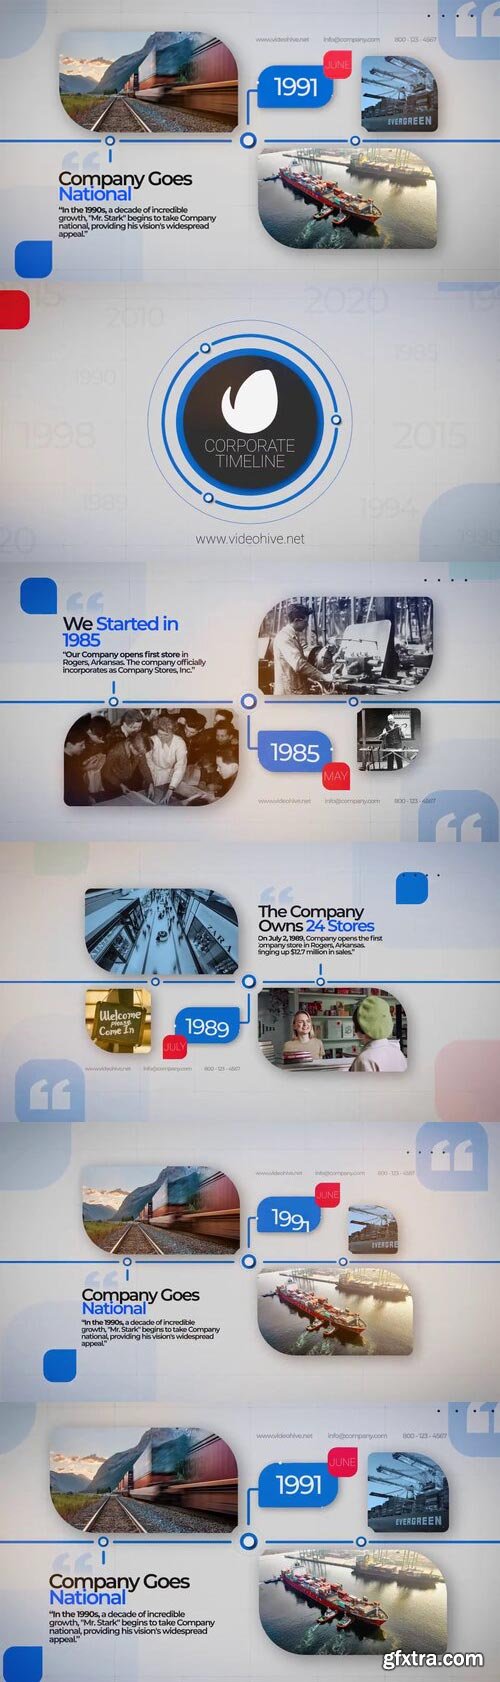 Videohive - Business Company Timeline - 31887364